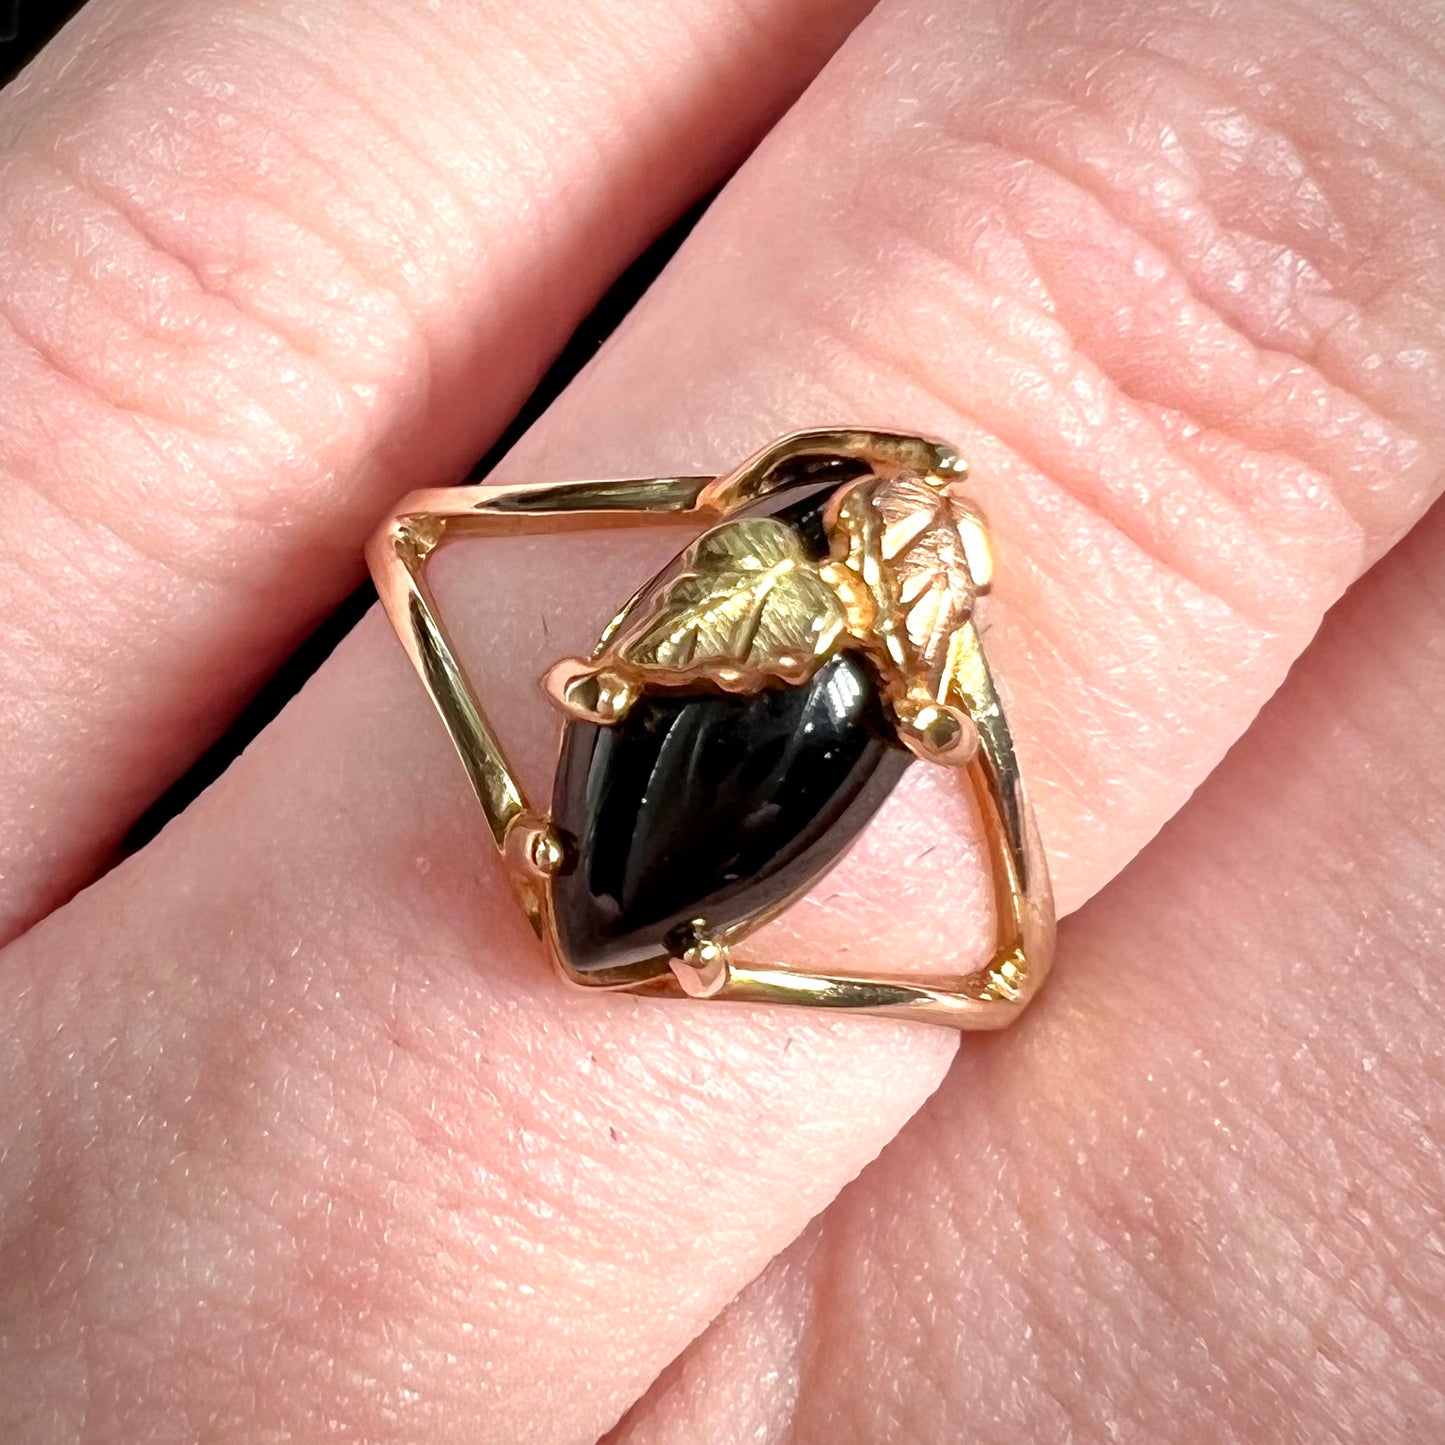 A split shank Black Hills gold ring set with a cabochon marquise cut black onyx.